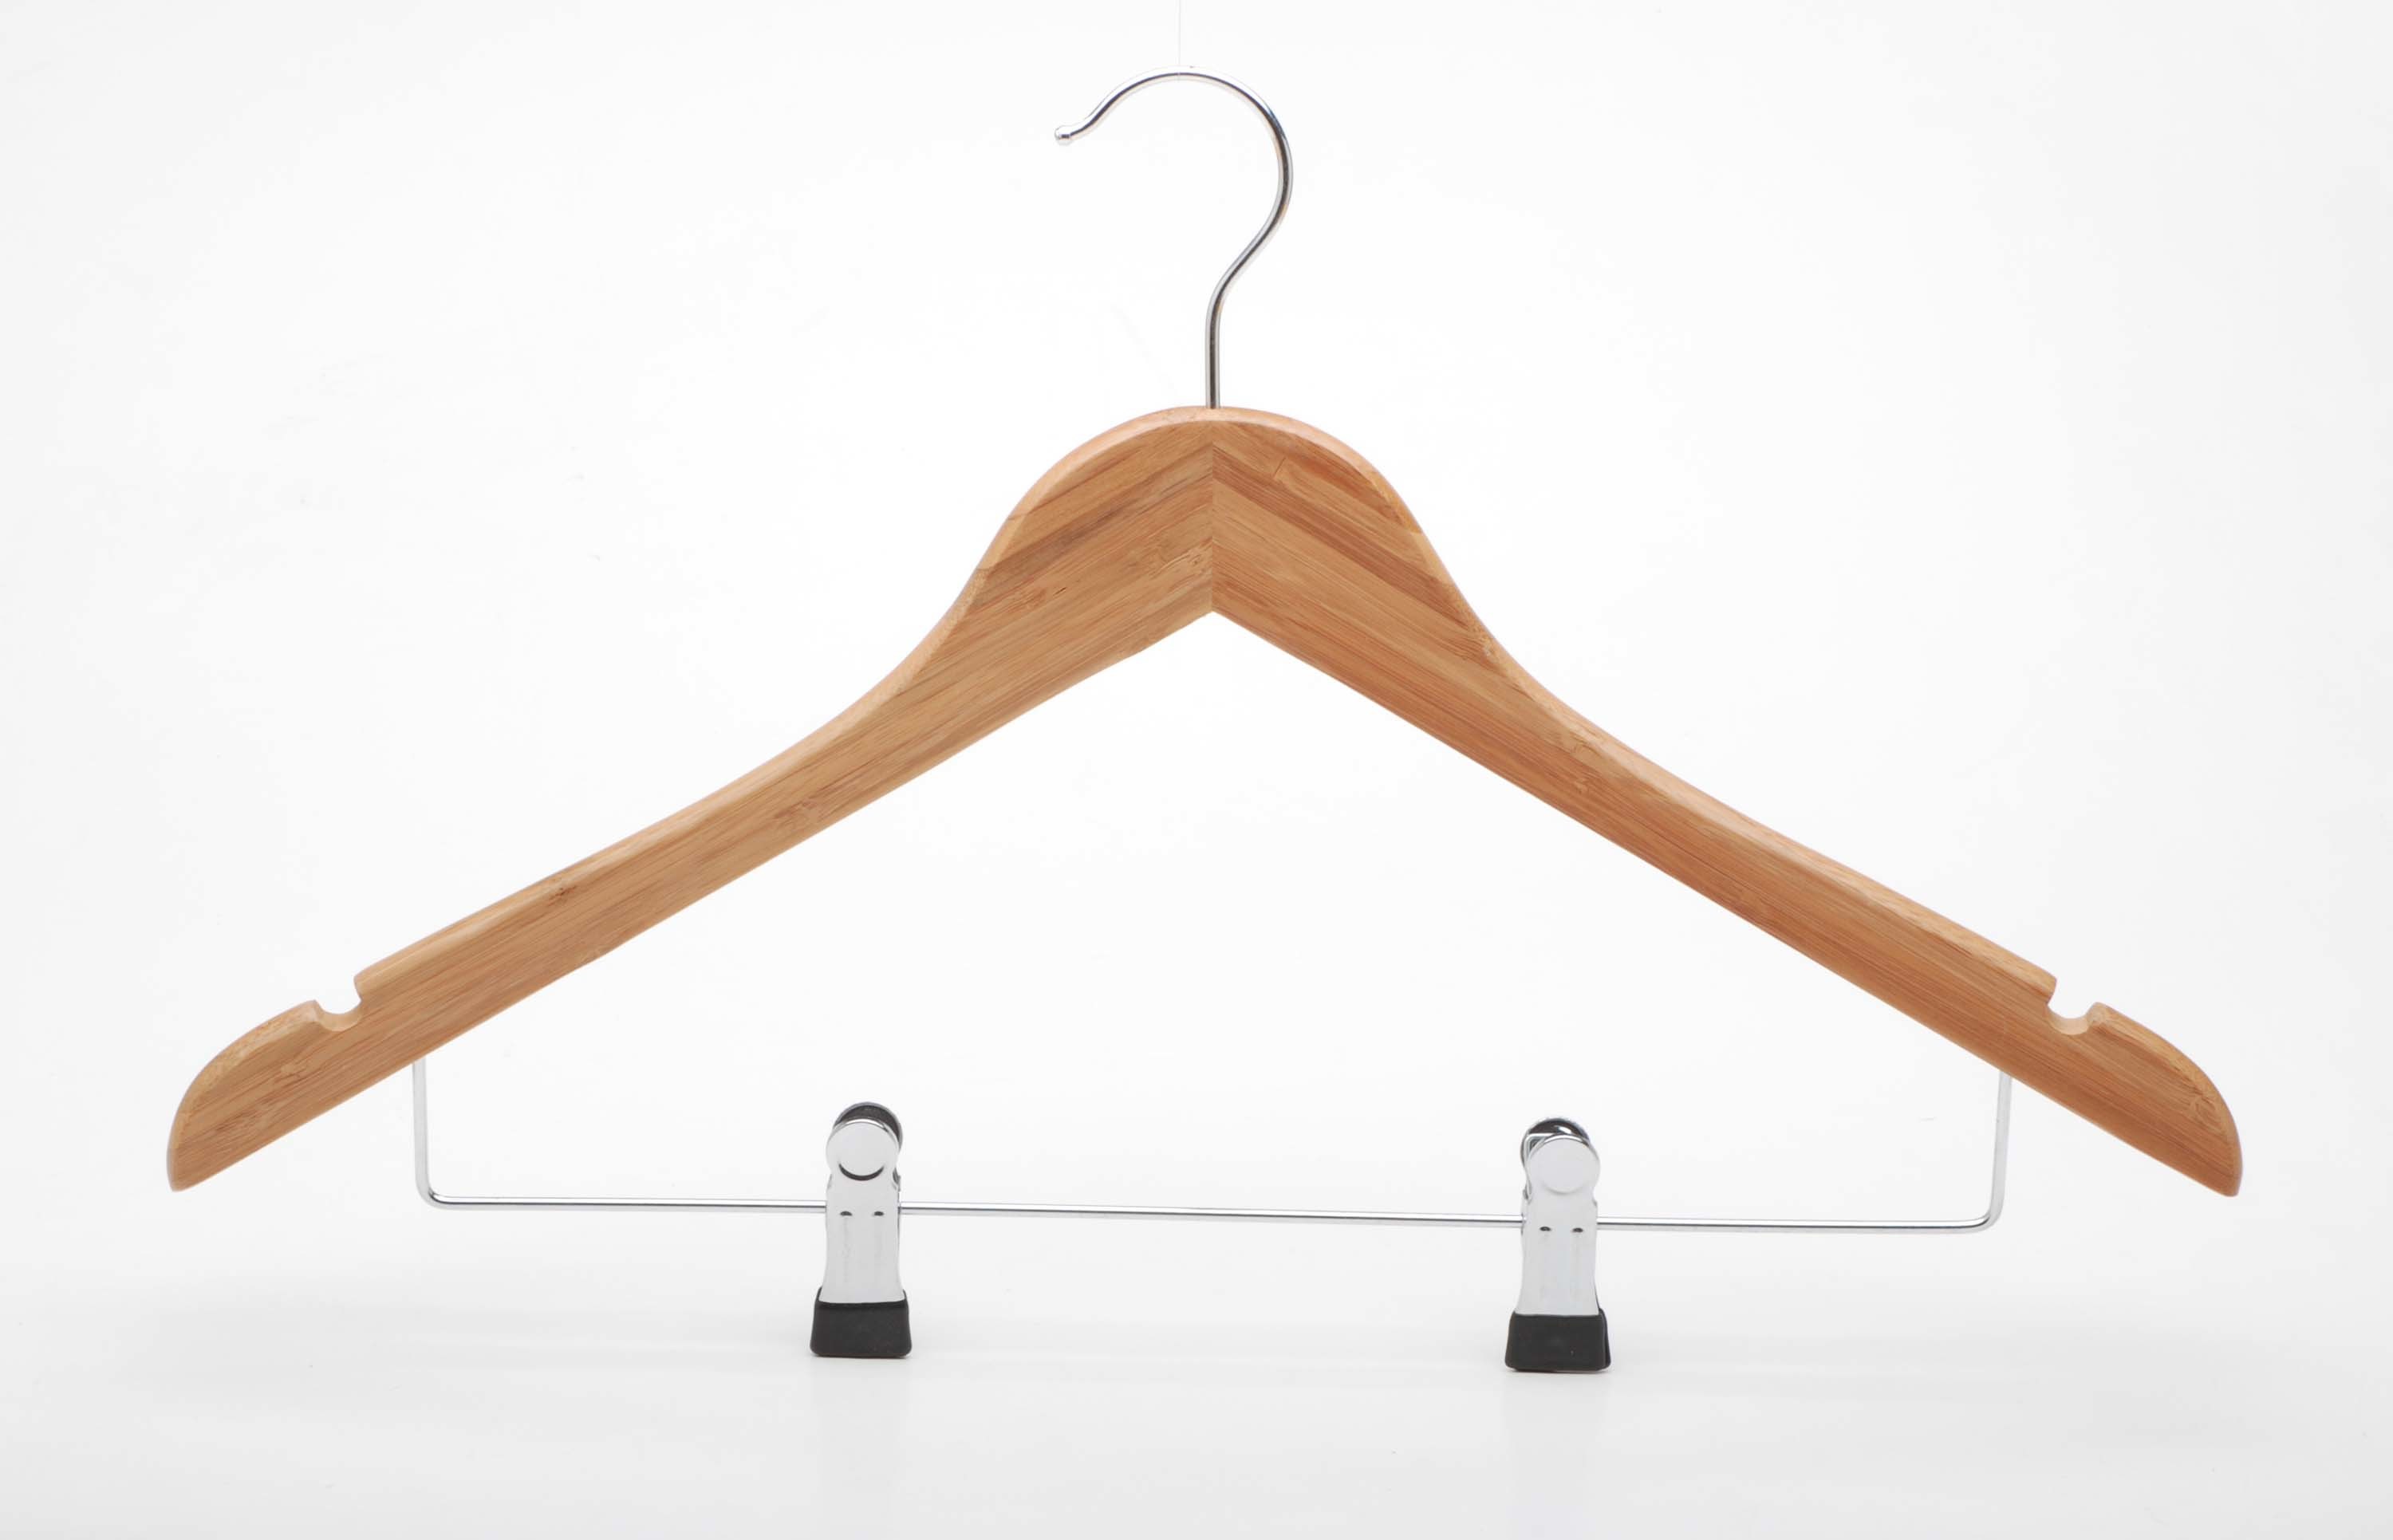 /proimages/2f0j00EeyQqIARhczb/bamboo-shirt-trousers-hanger-with-clips.jpg